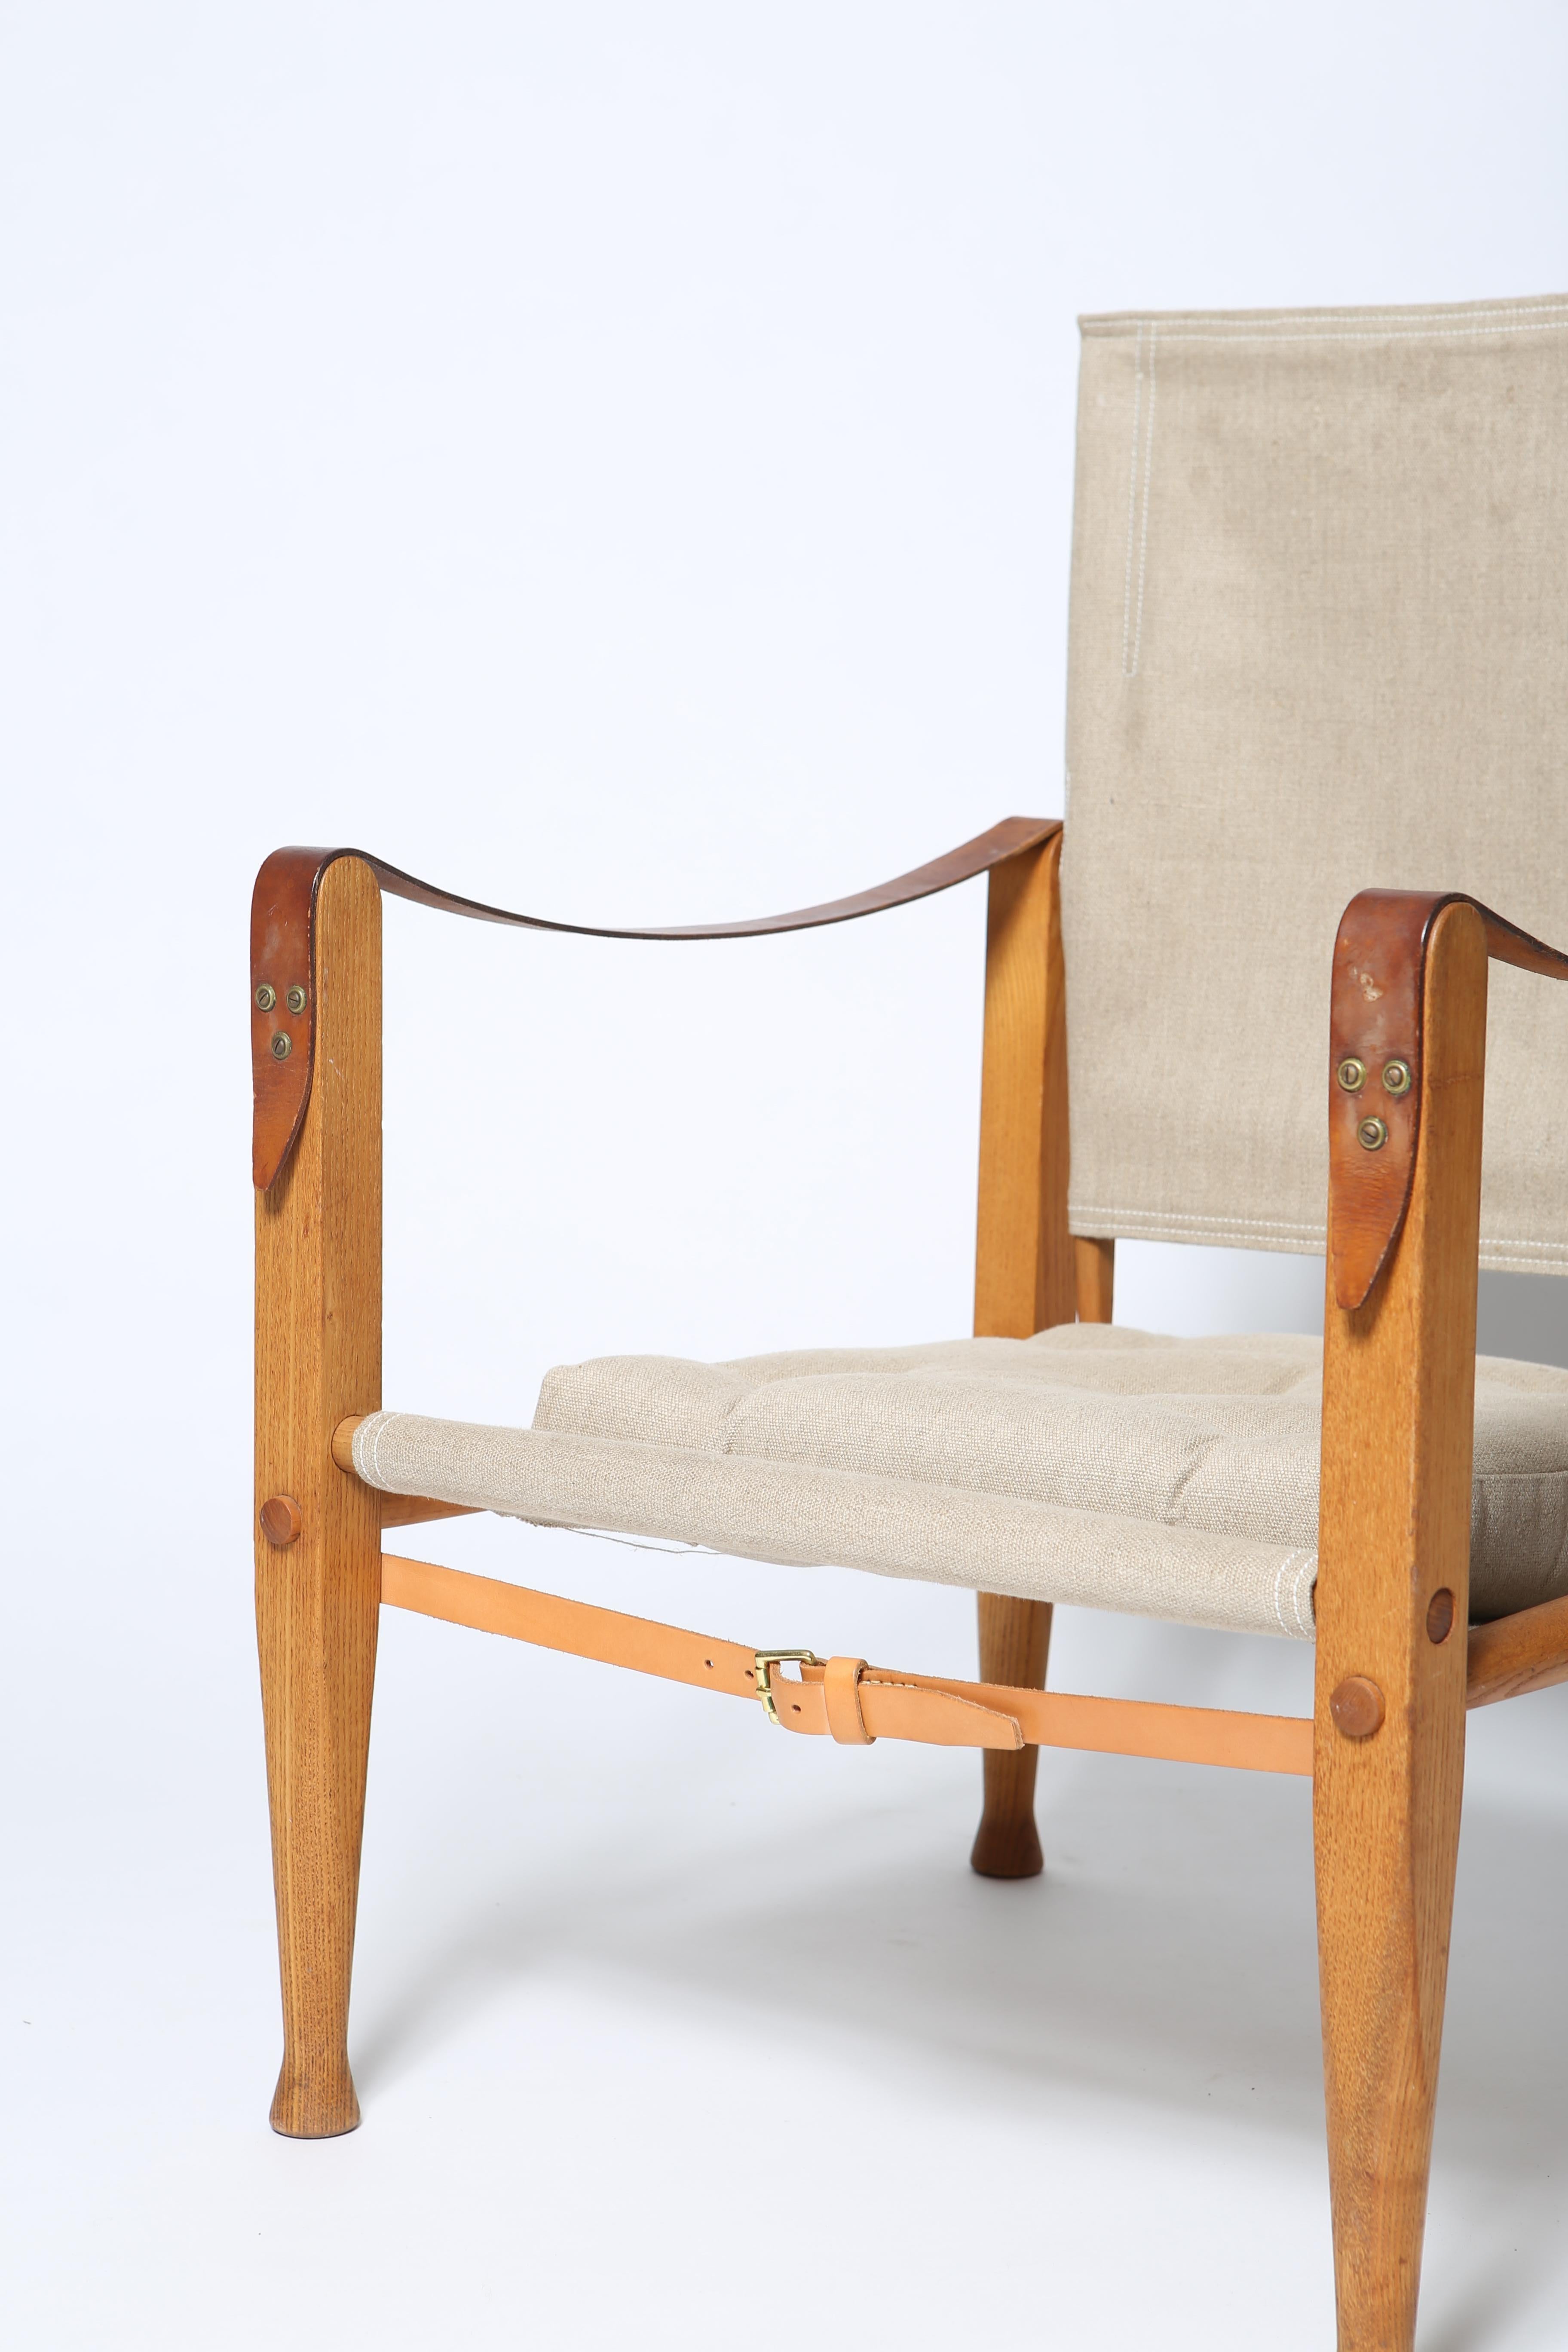 Iconic original safari chair by professor Kaare Klint. Designed 1927. This version dates to the 1960s and is executed in solid ash. Nice patina to the wood, and left unrestored. The canvas elements are newer, and made exactly as the original design